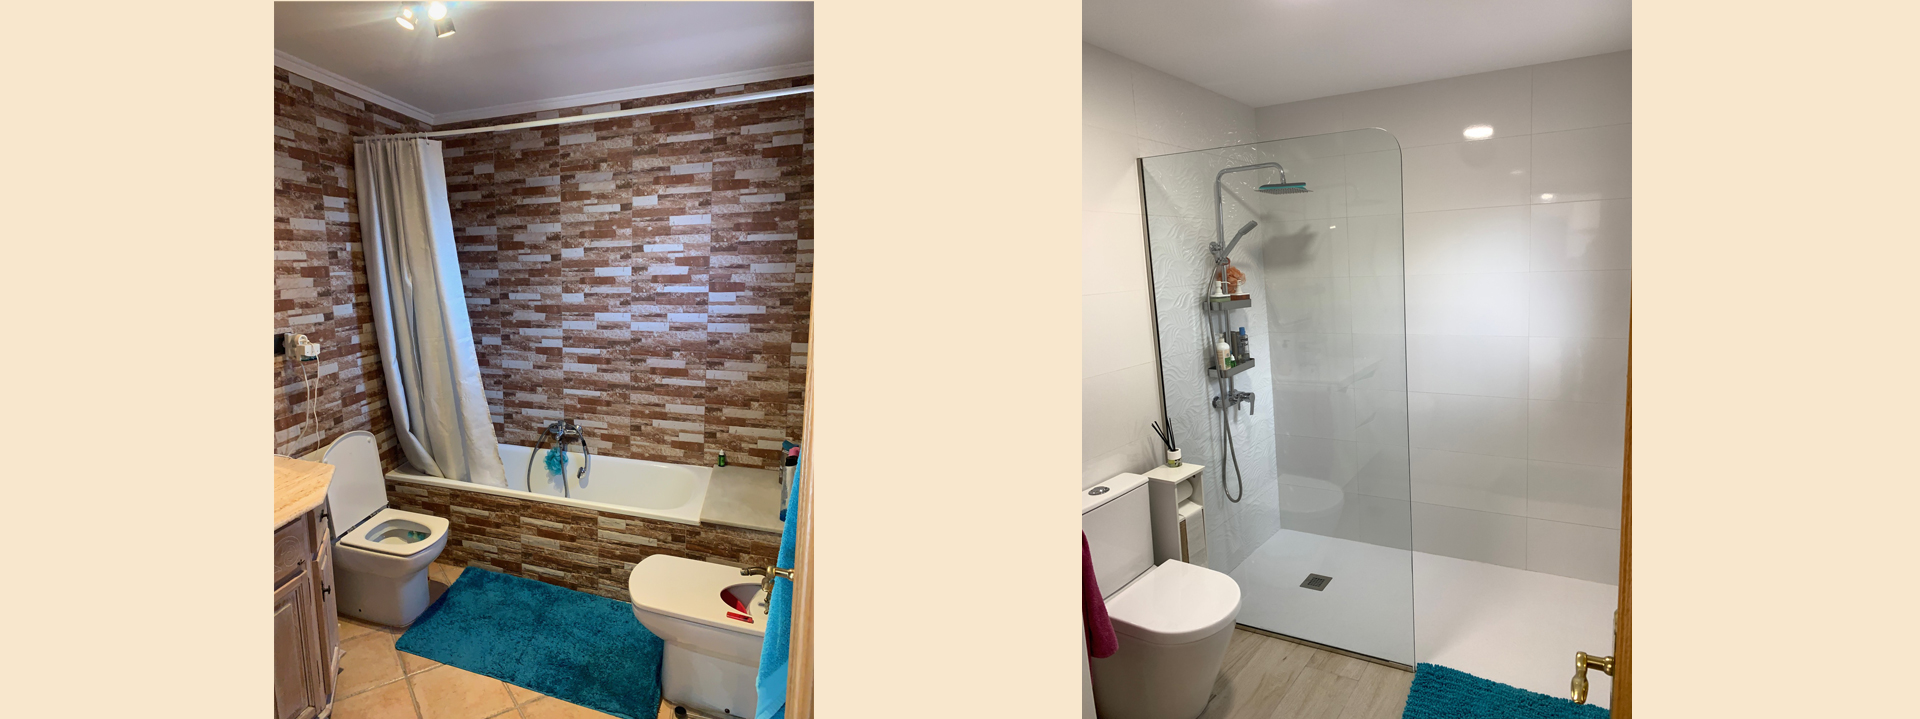 Bathroom-renovation-before-and-after-2